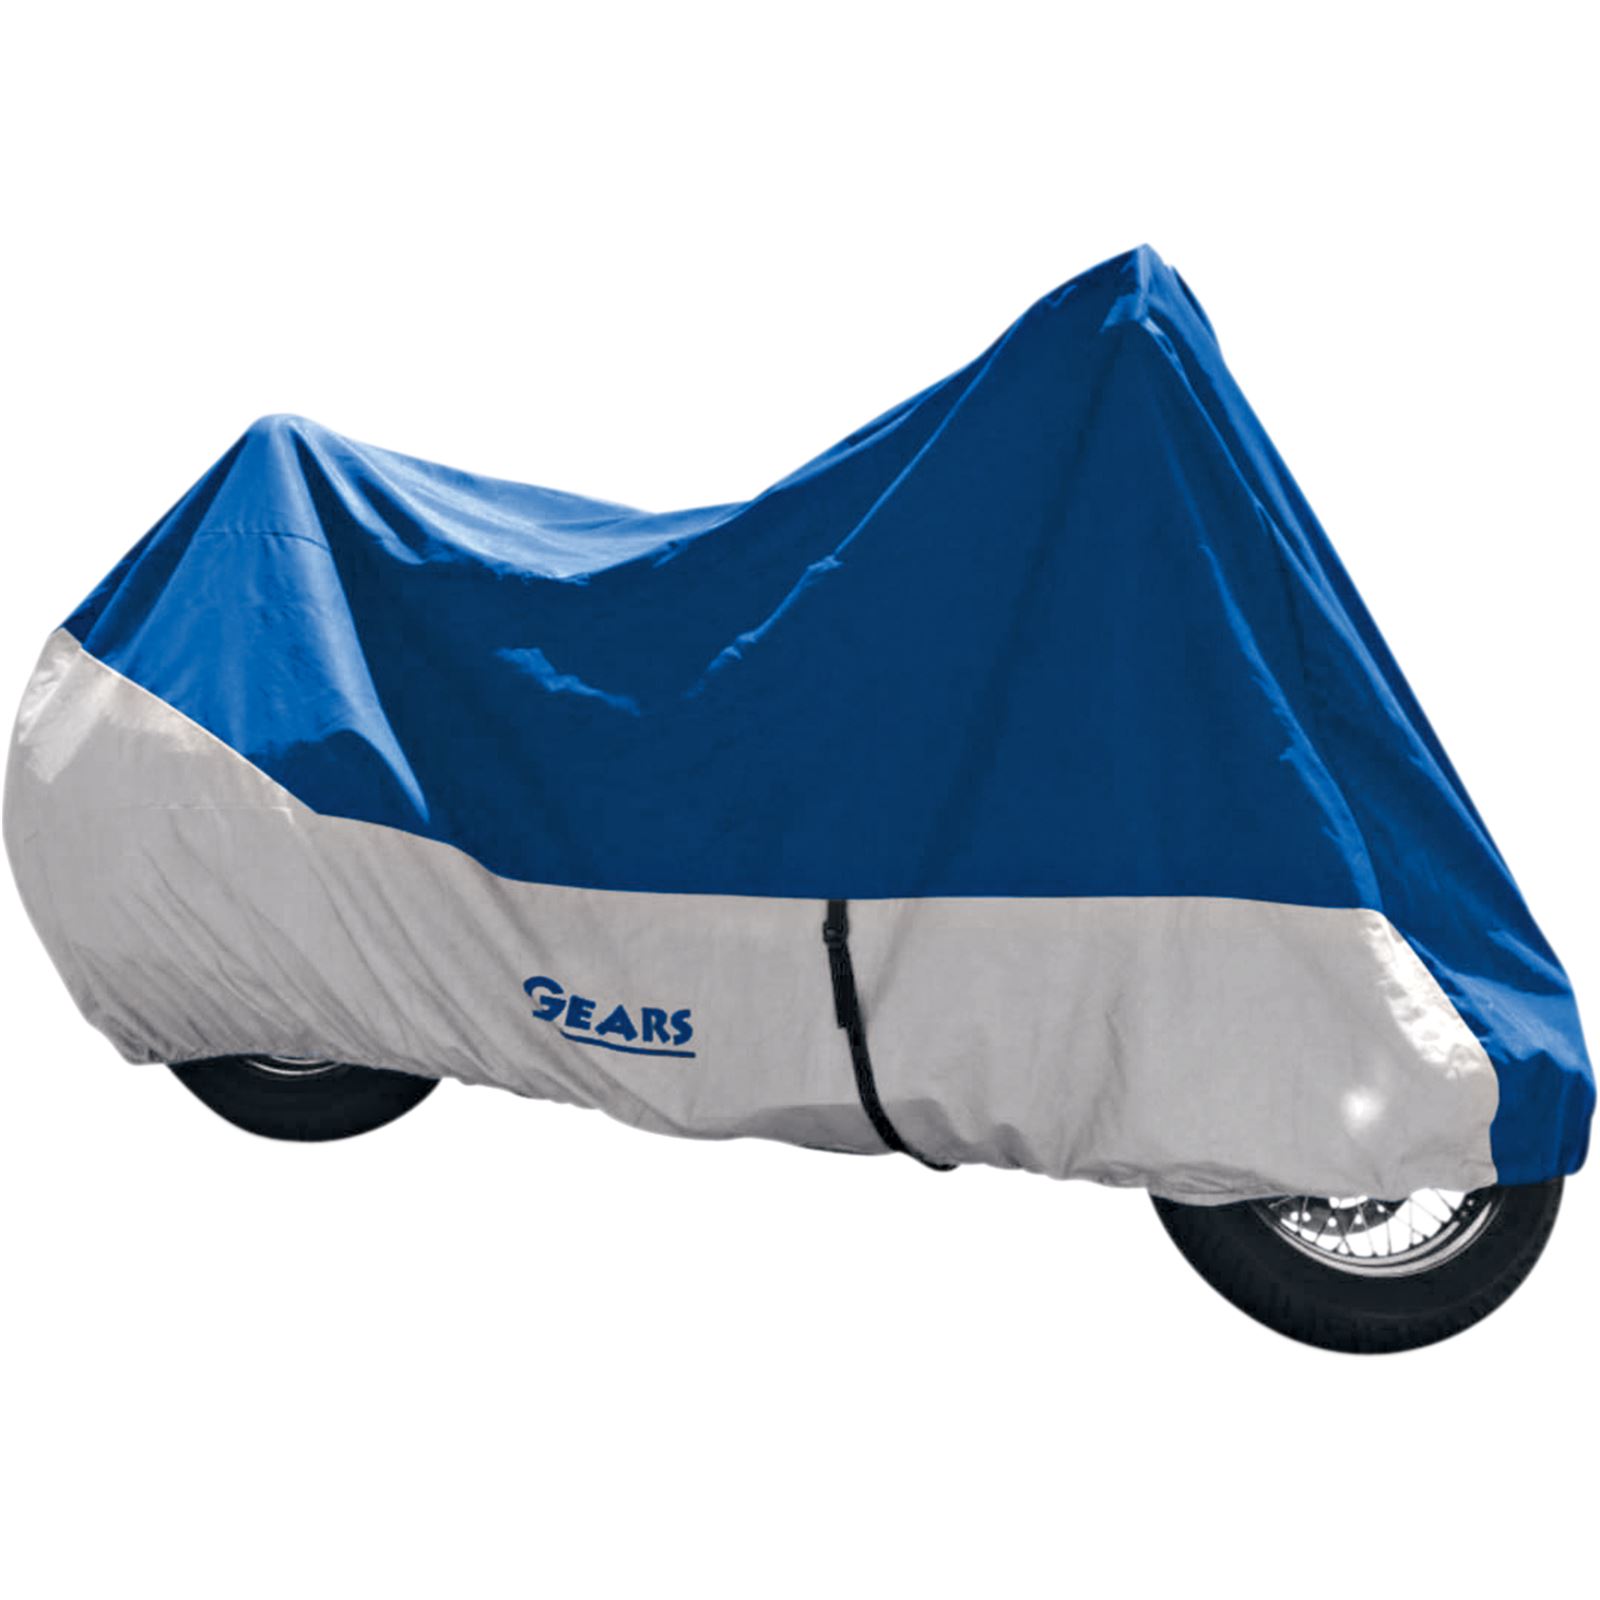 Gears Motorcycle Cover - Large